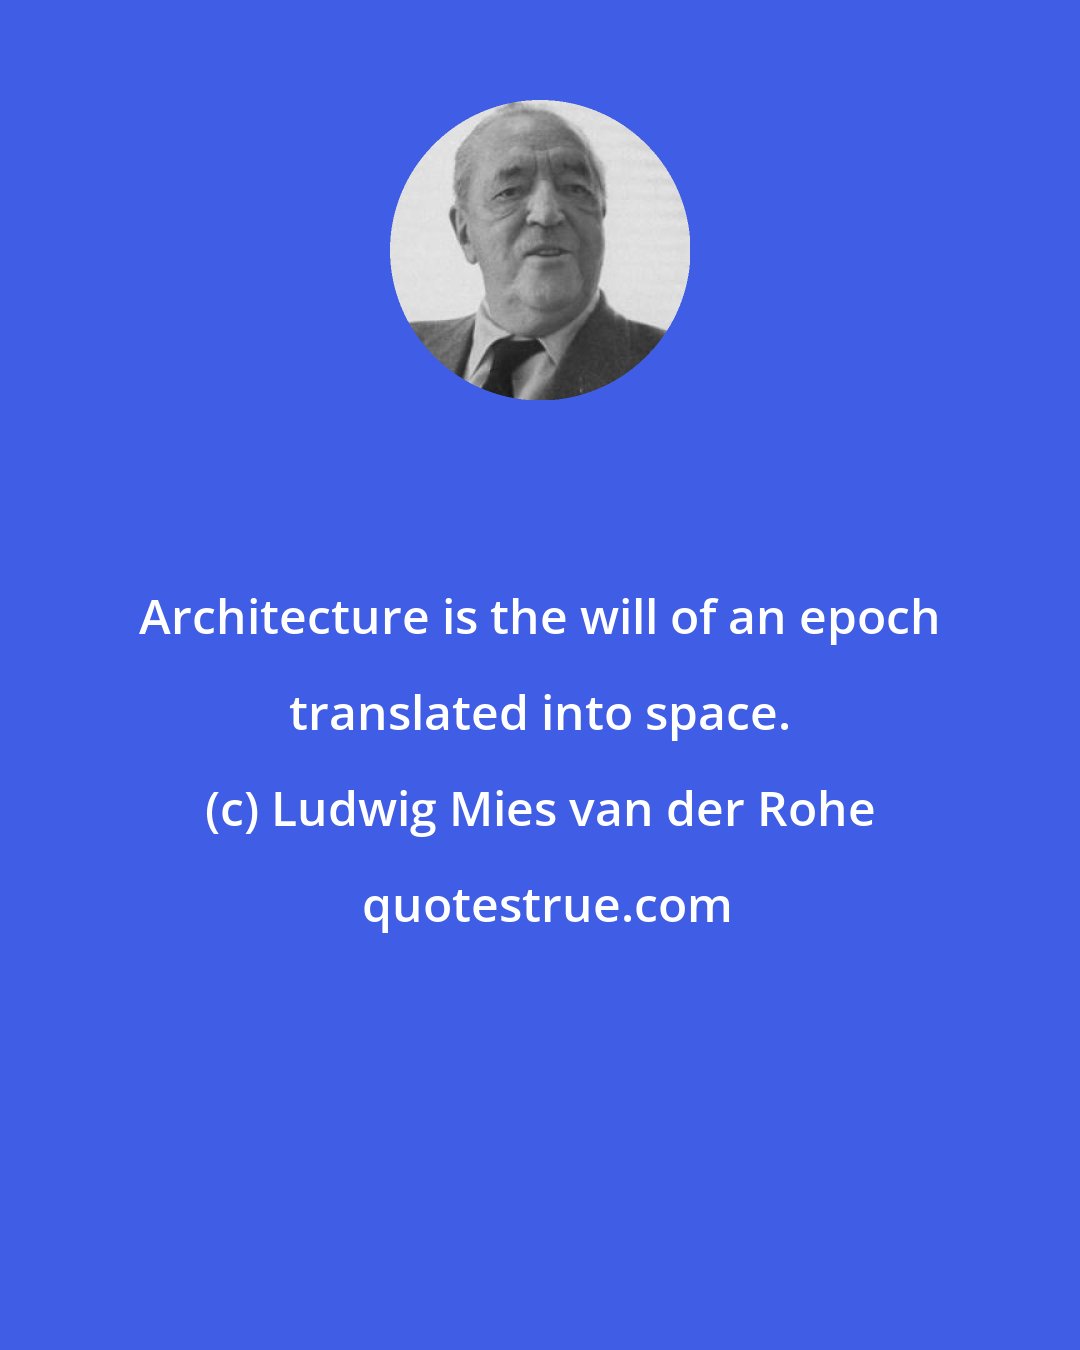 Ludwig Mies van der Rohe: Architecture is the will of an epoch translated into space.